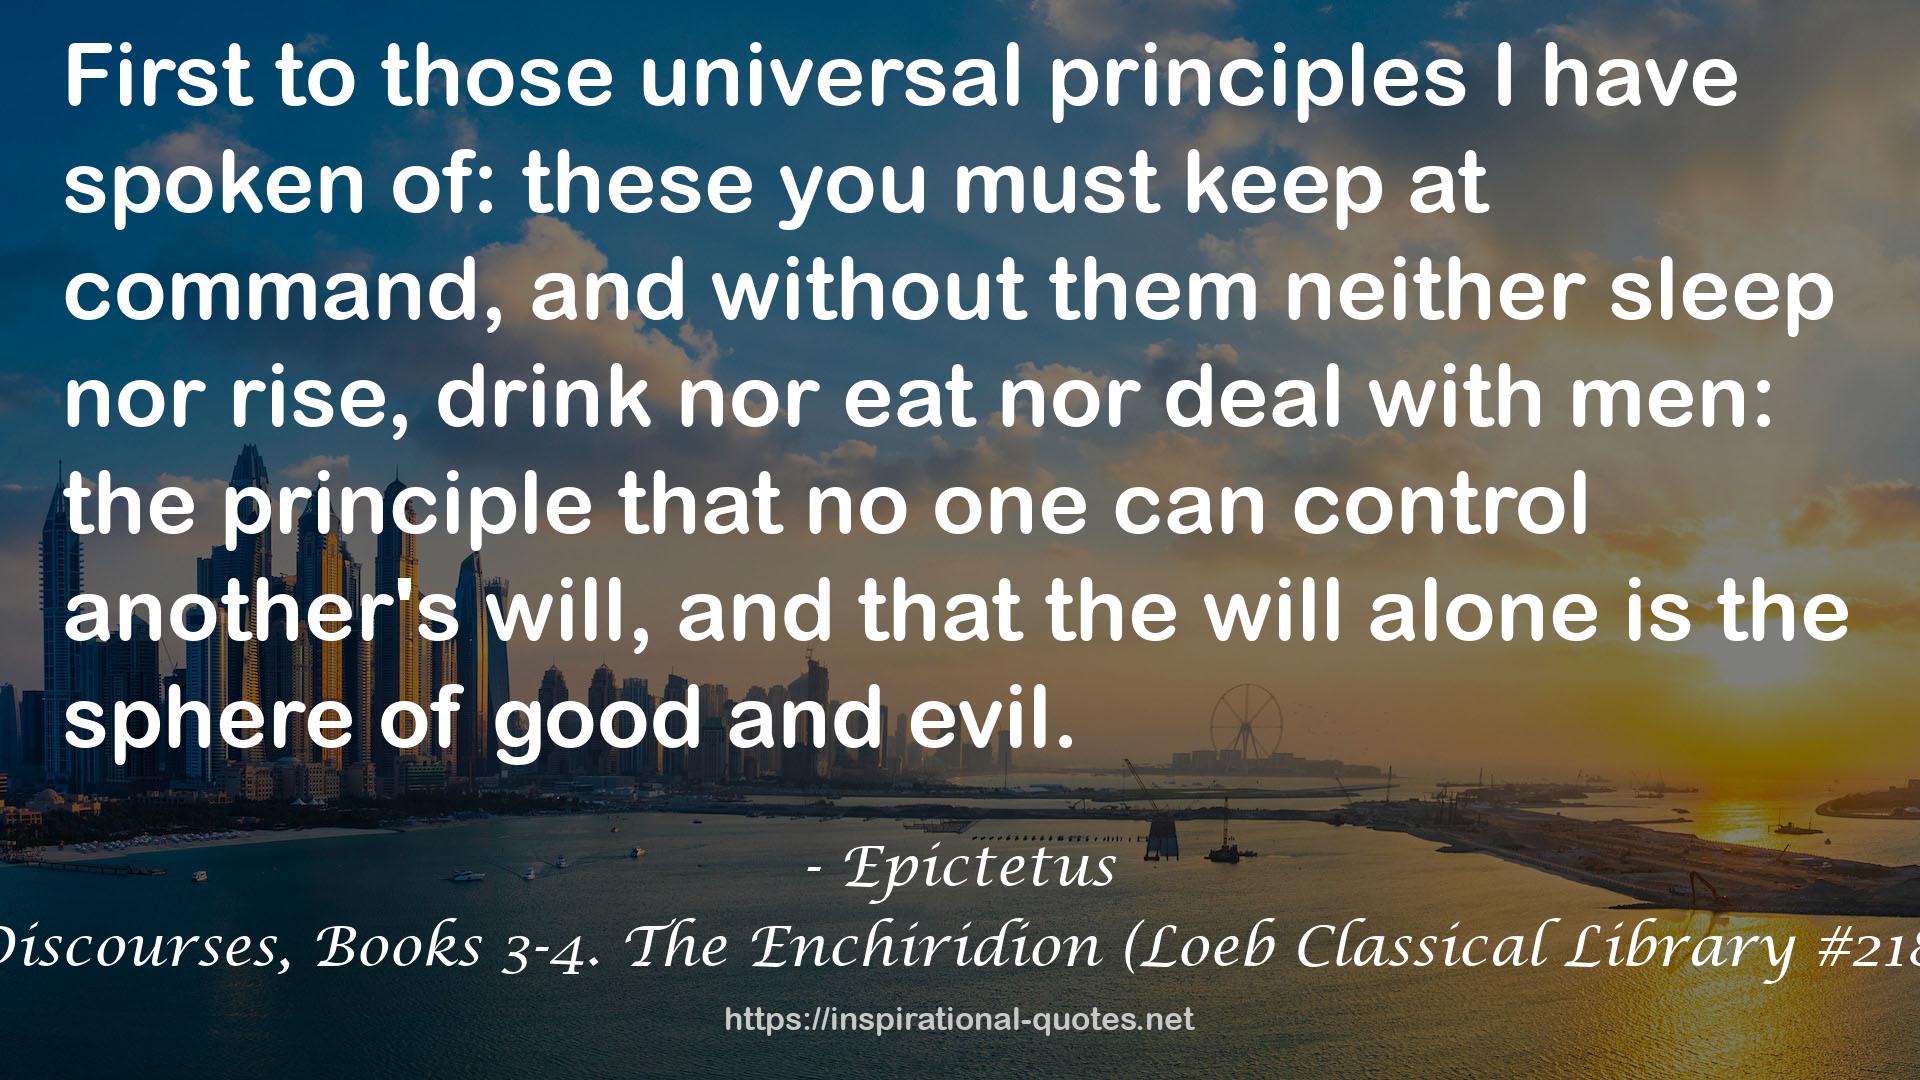 Discourses, Books 3-4. The Enchiridion (Loeb Classical Library #218) QUOTES